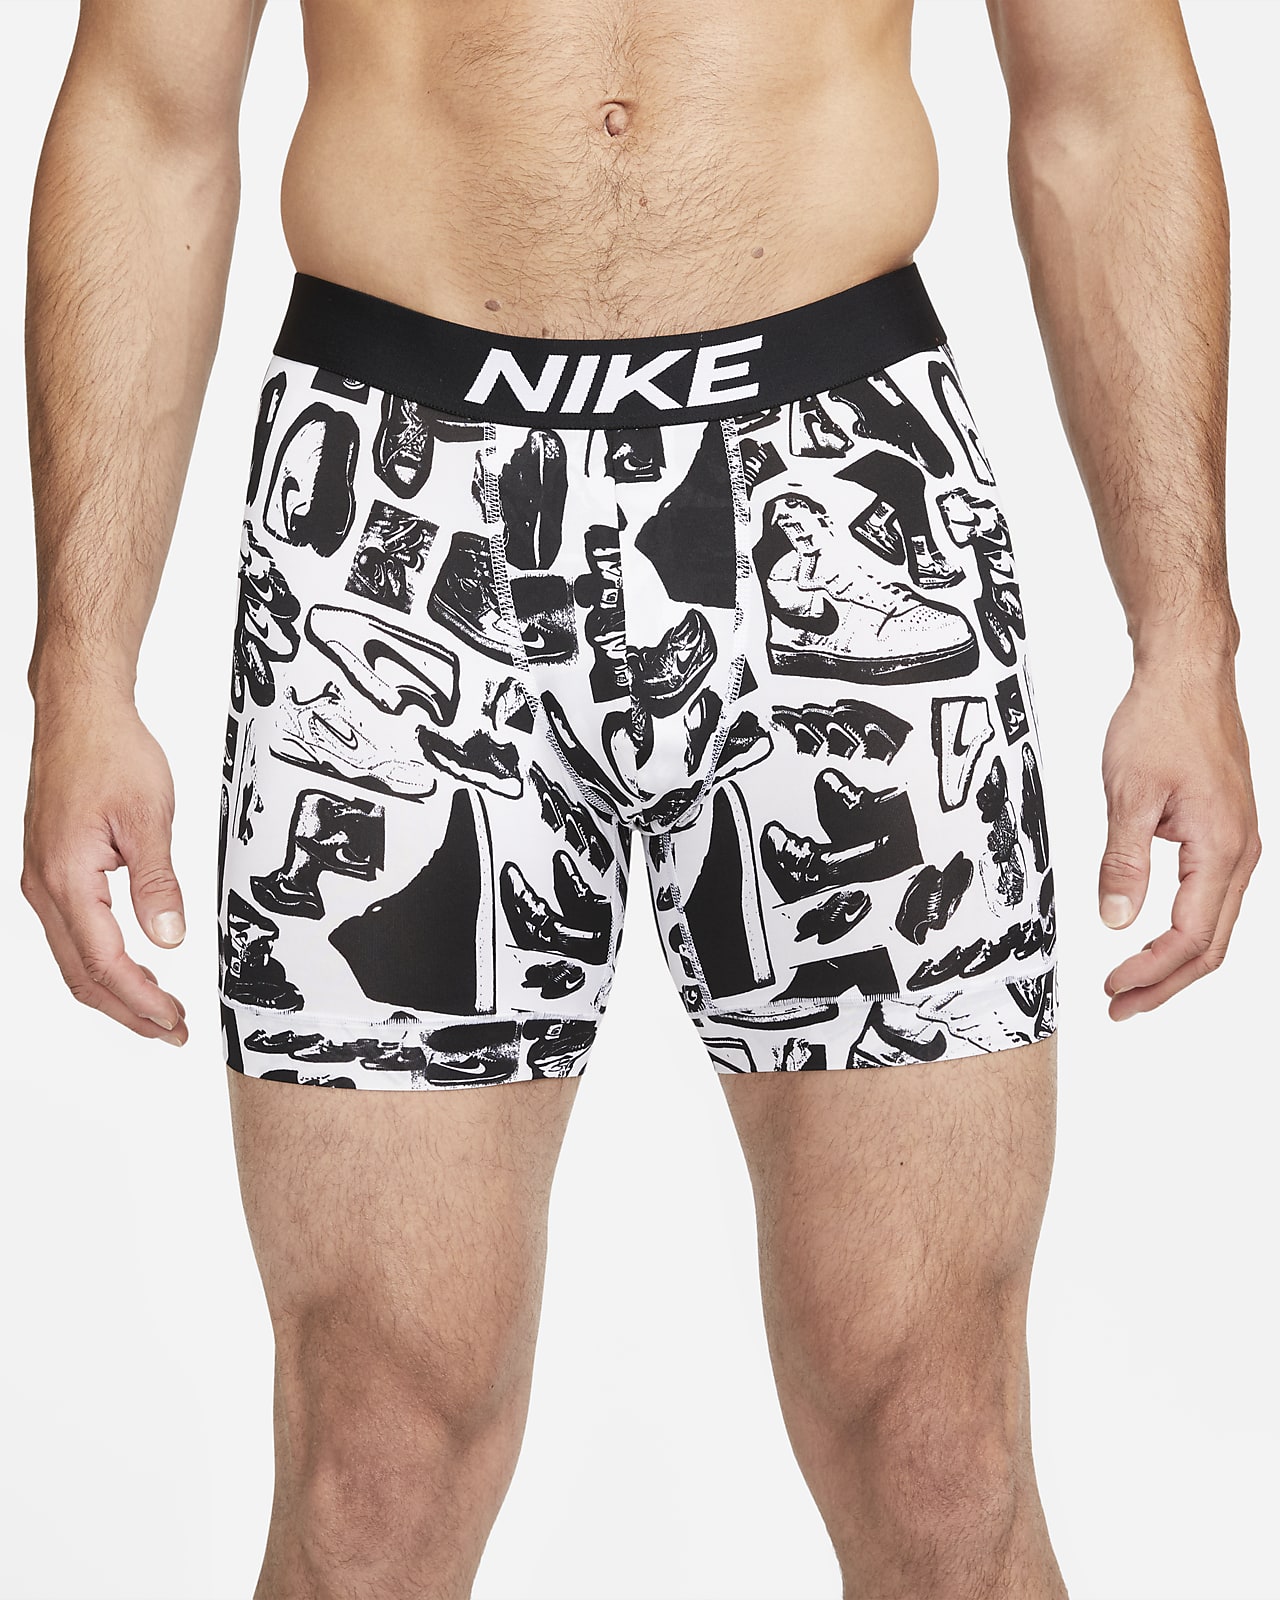 Nike Dri-Fit Essential Micro Trunks Men XL Normally (nu4) for sale online